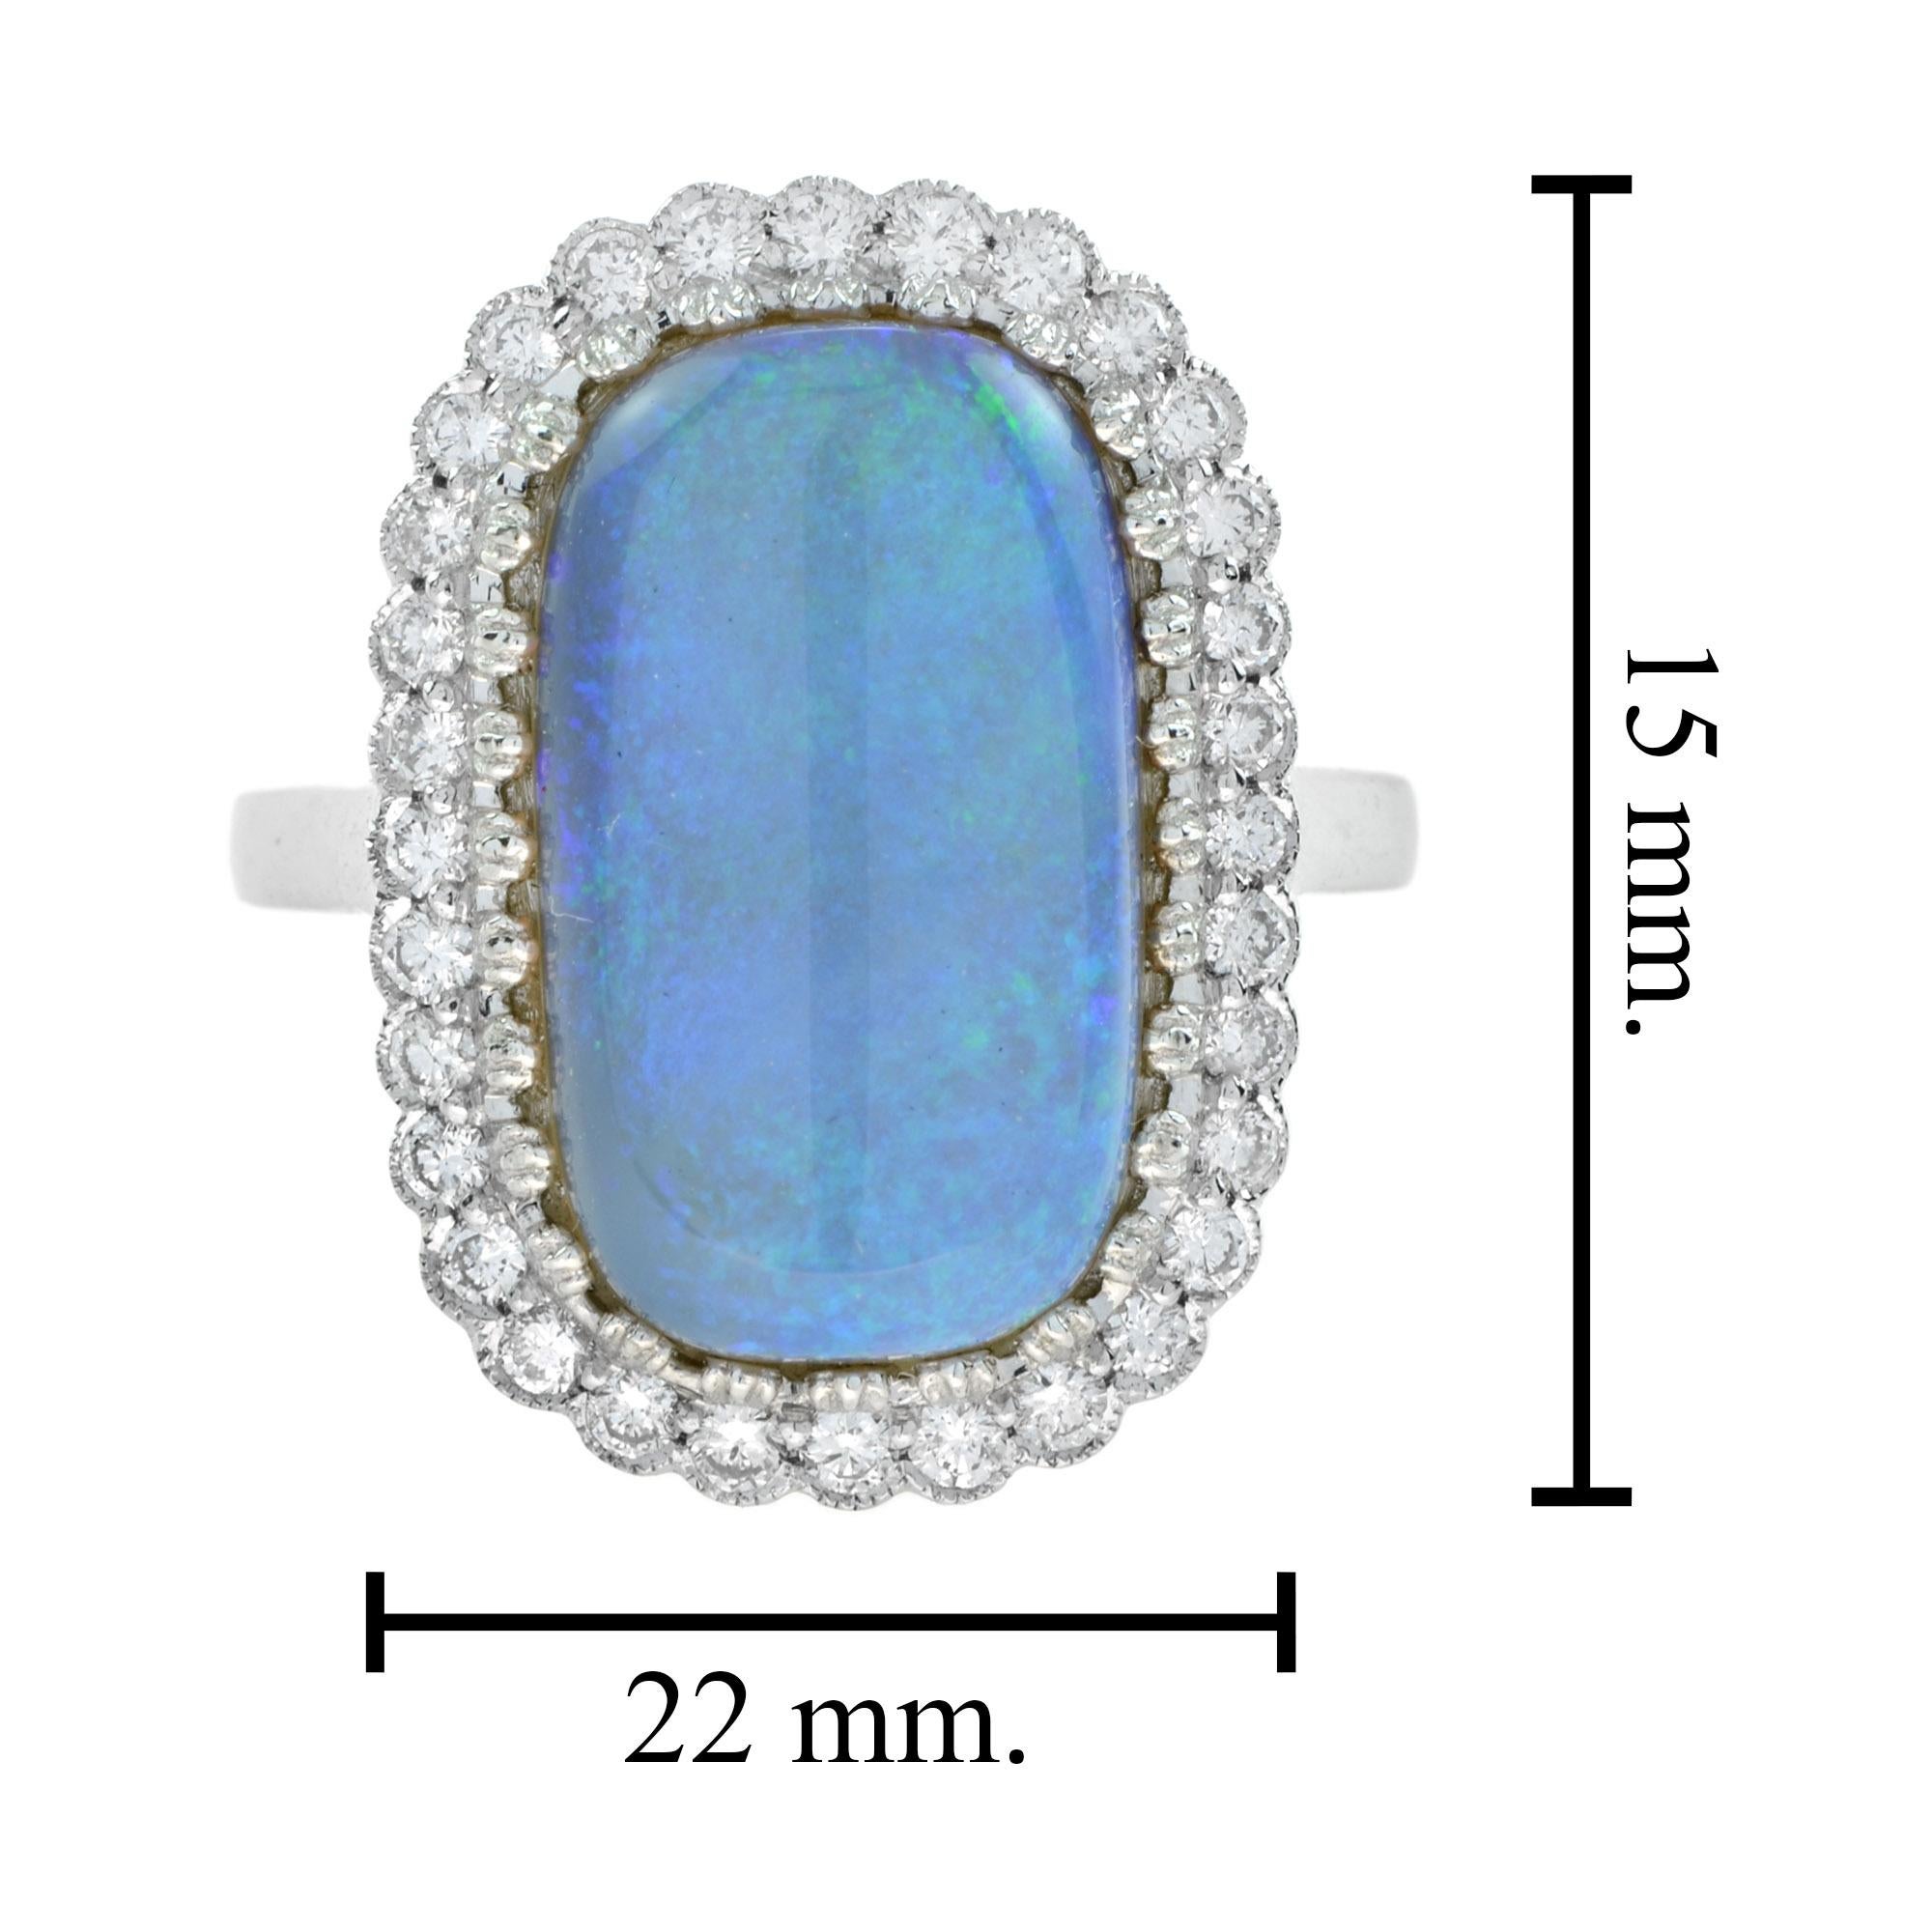 5.2 Ct. Crystal Australian Opal and Diamond Halo Ring in 18K White Gold For Sale 4